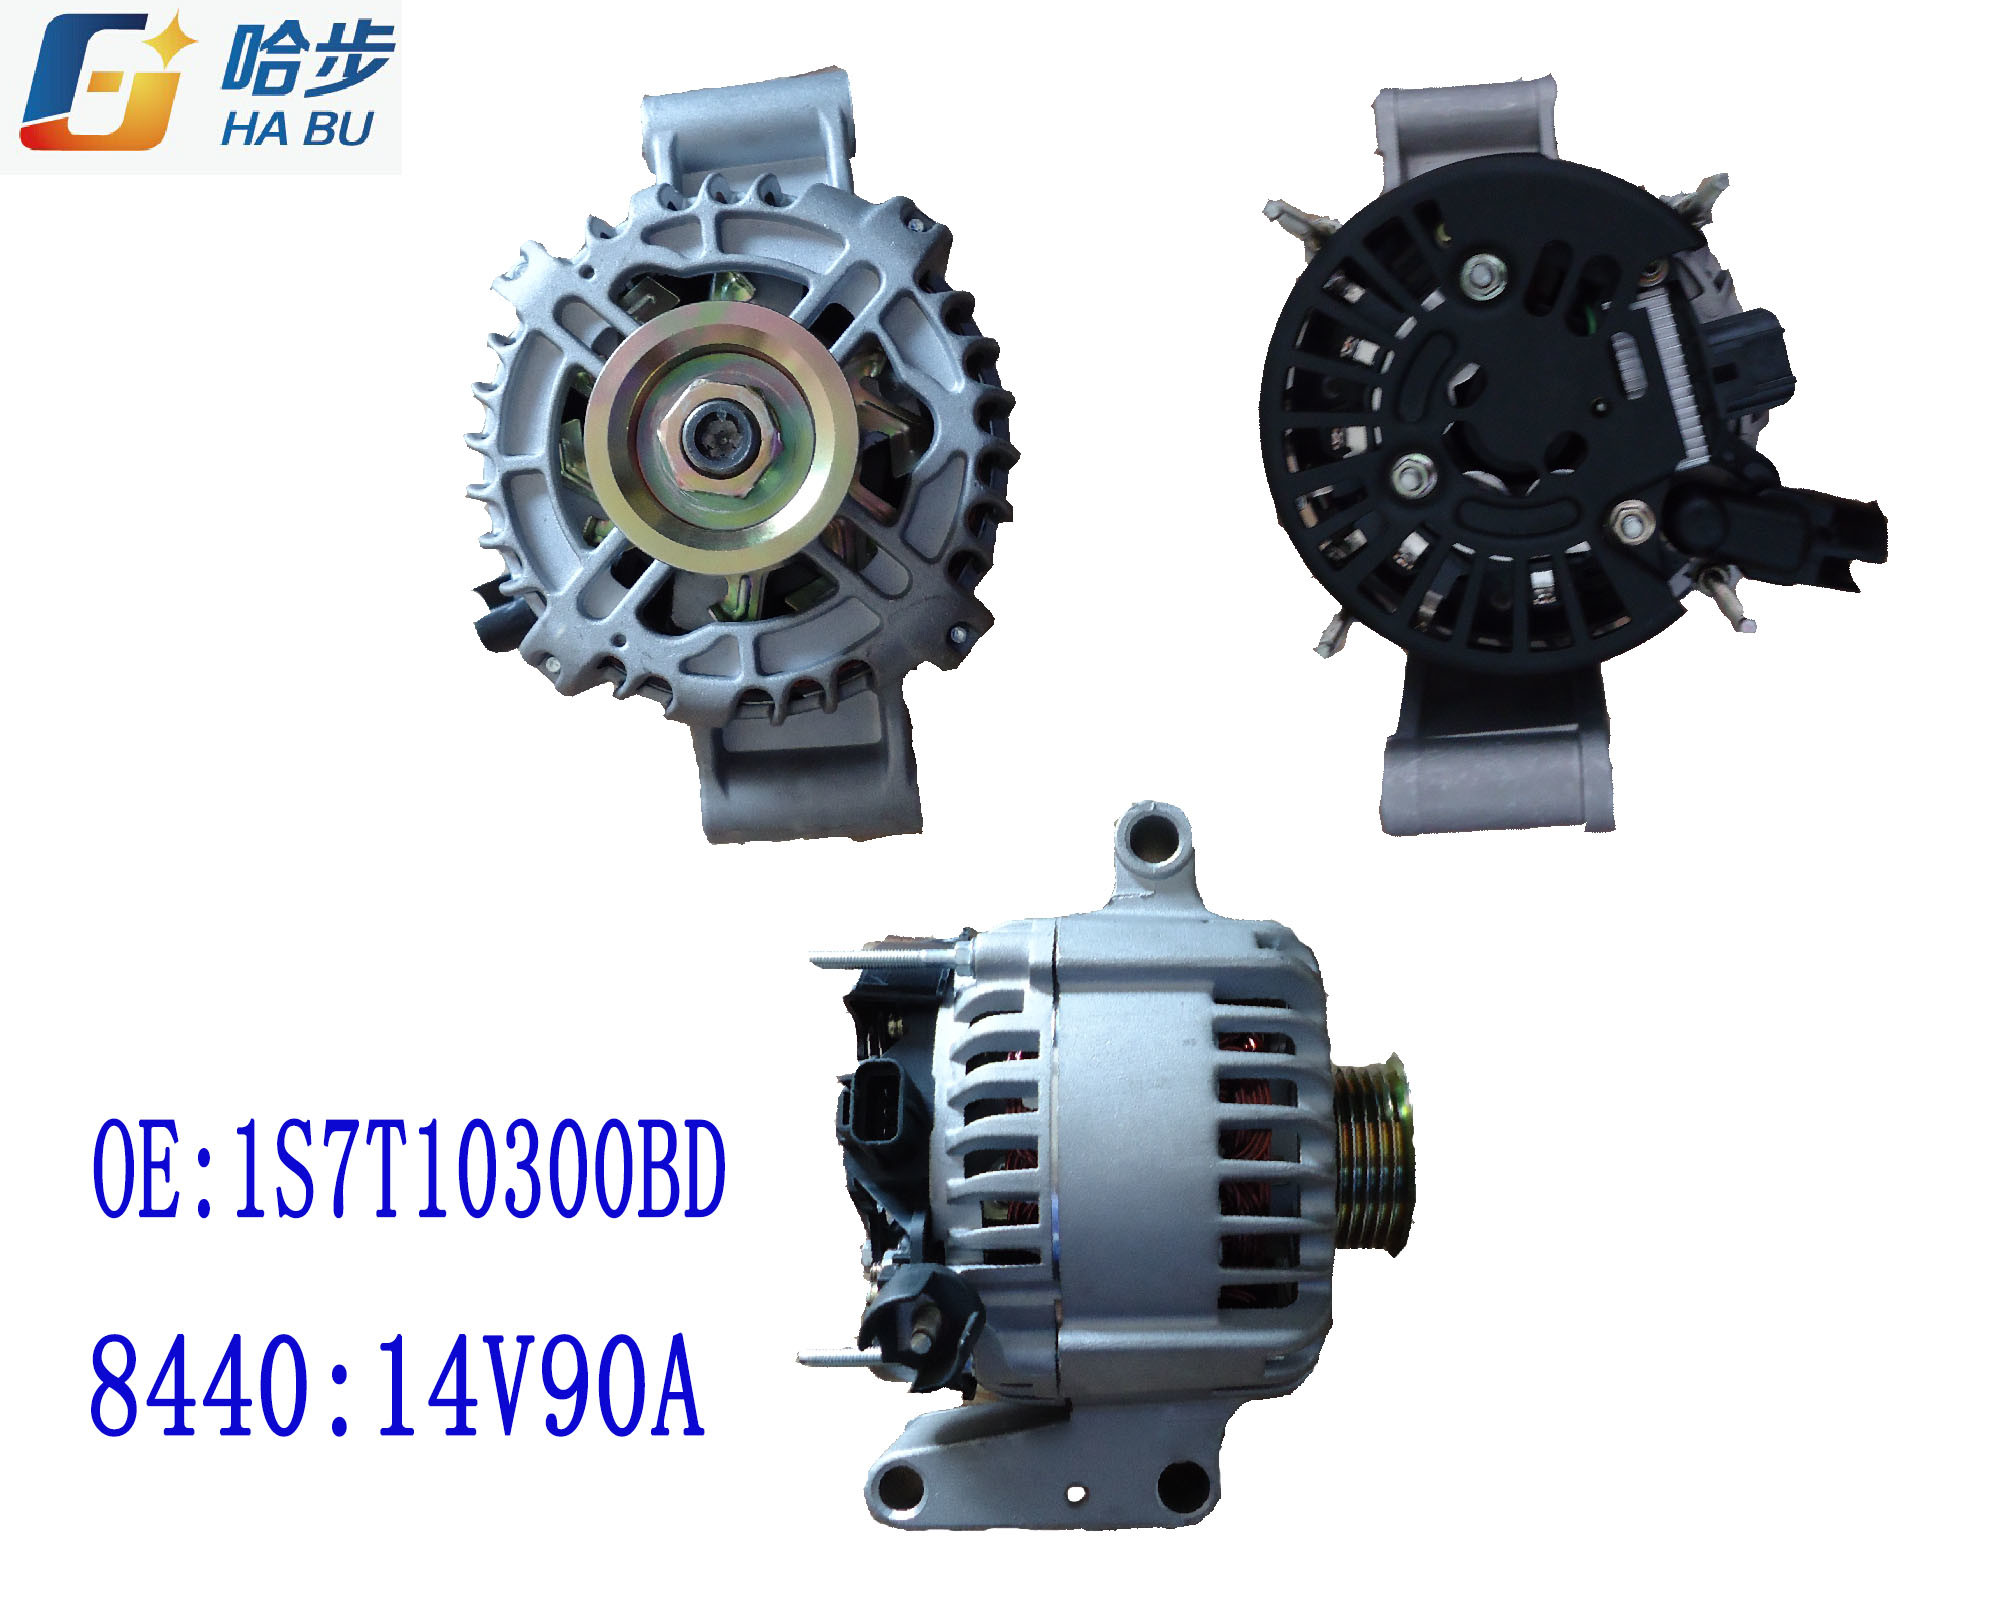 Auto / AC Alternator for Ford Focus 2.3L 03 04 RC28 8440, 1s7t-10300-Ba